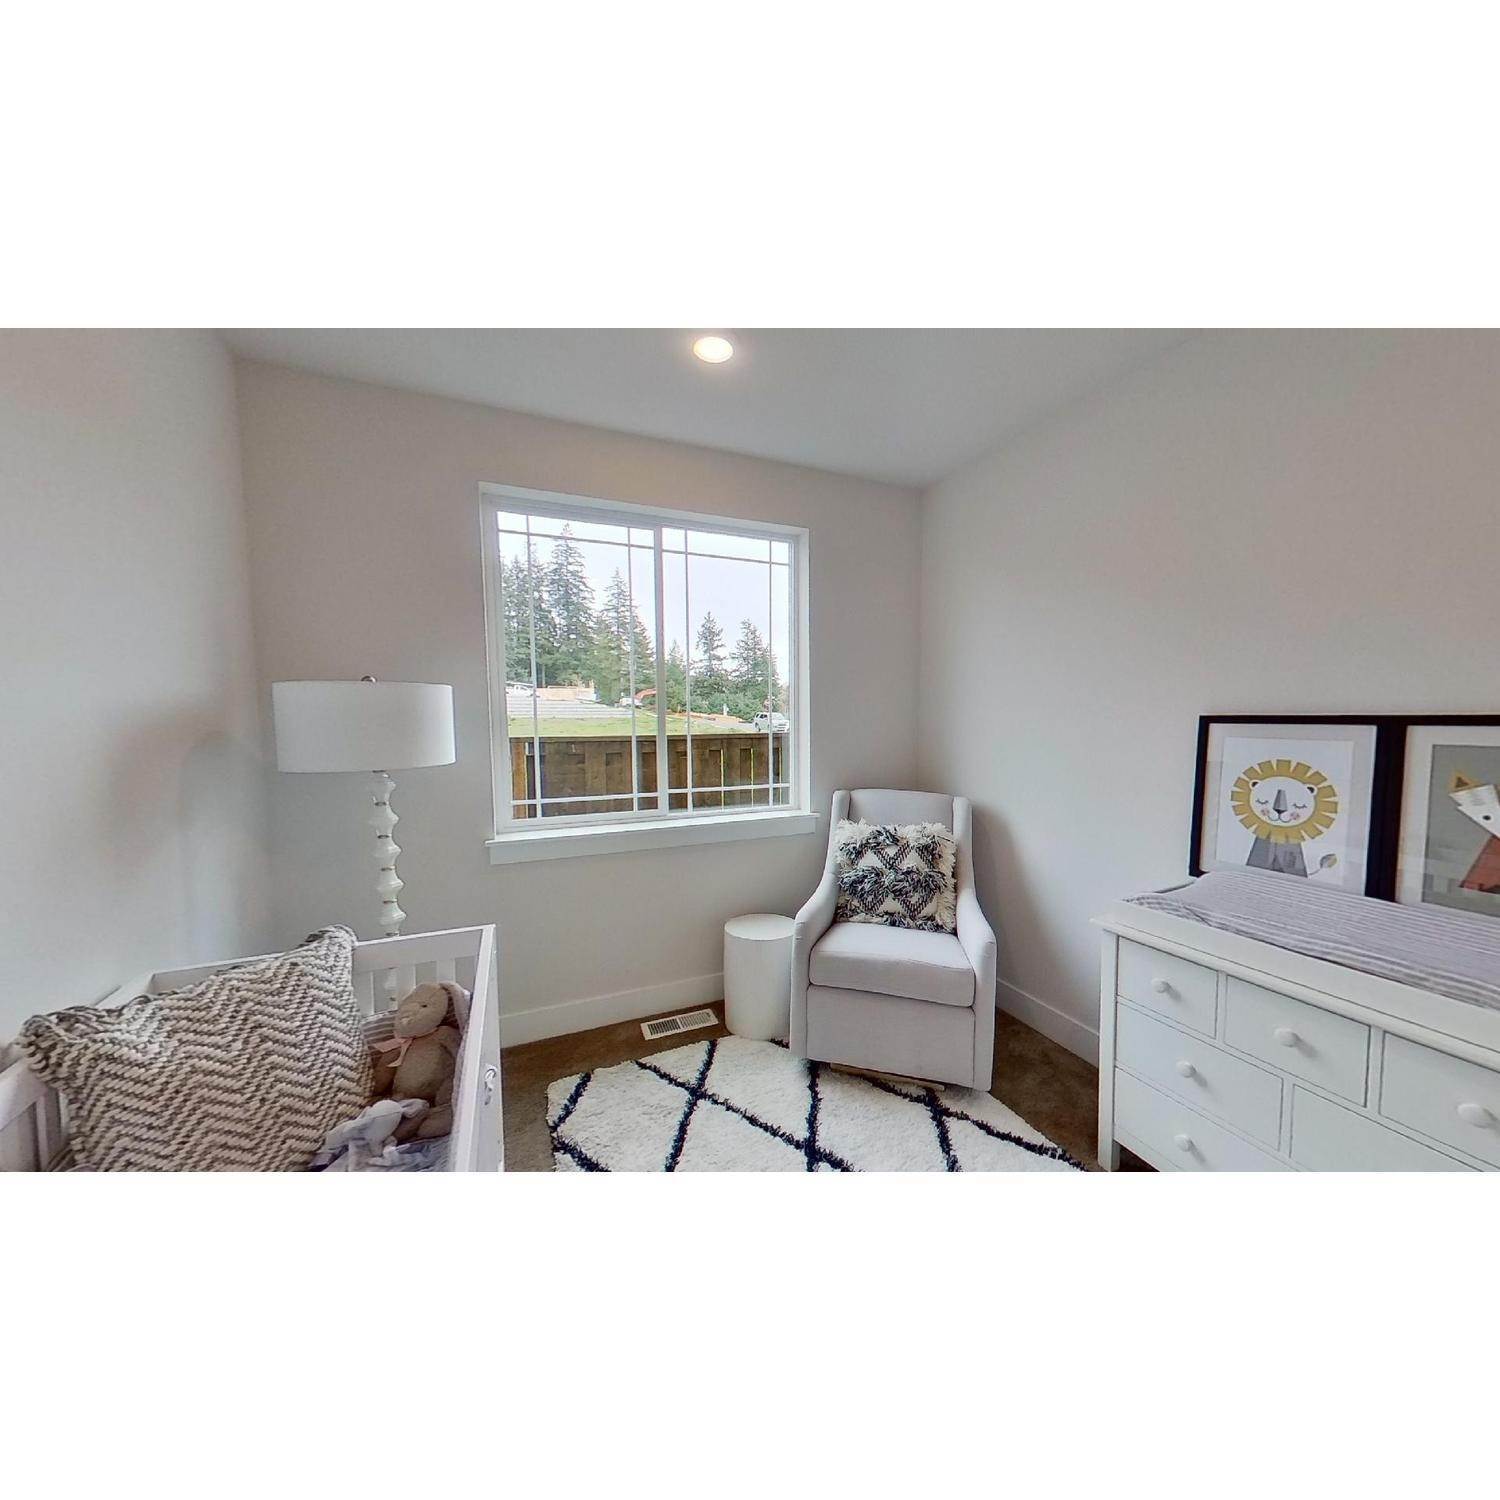 16786 SW Leaf Lane, Tigard, OR 97224에 South River Terrace Innovate Condominiums 건물